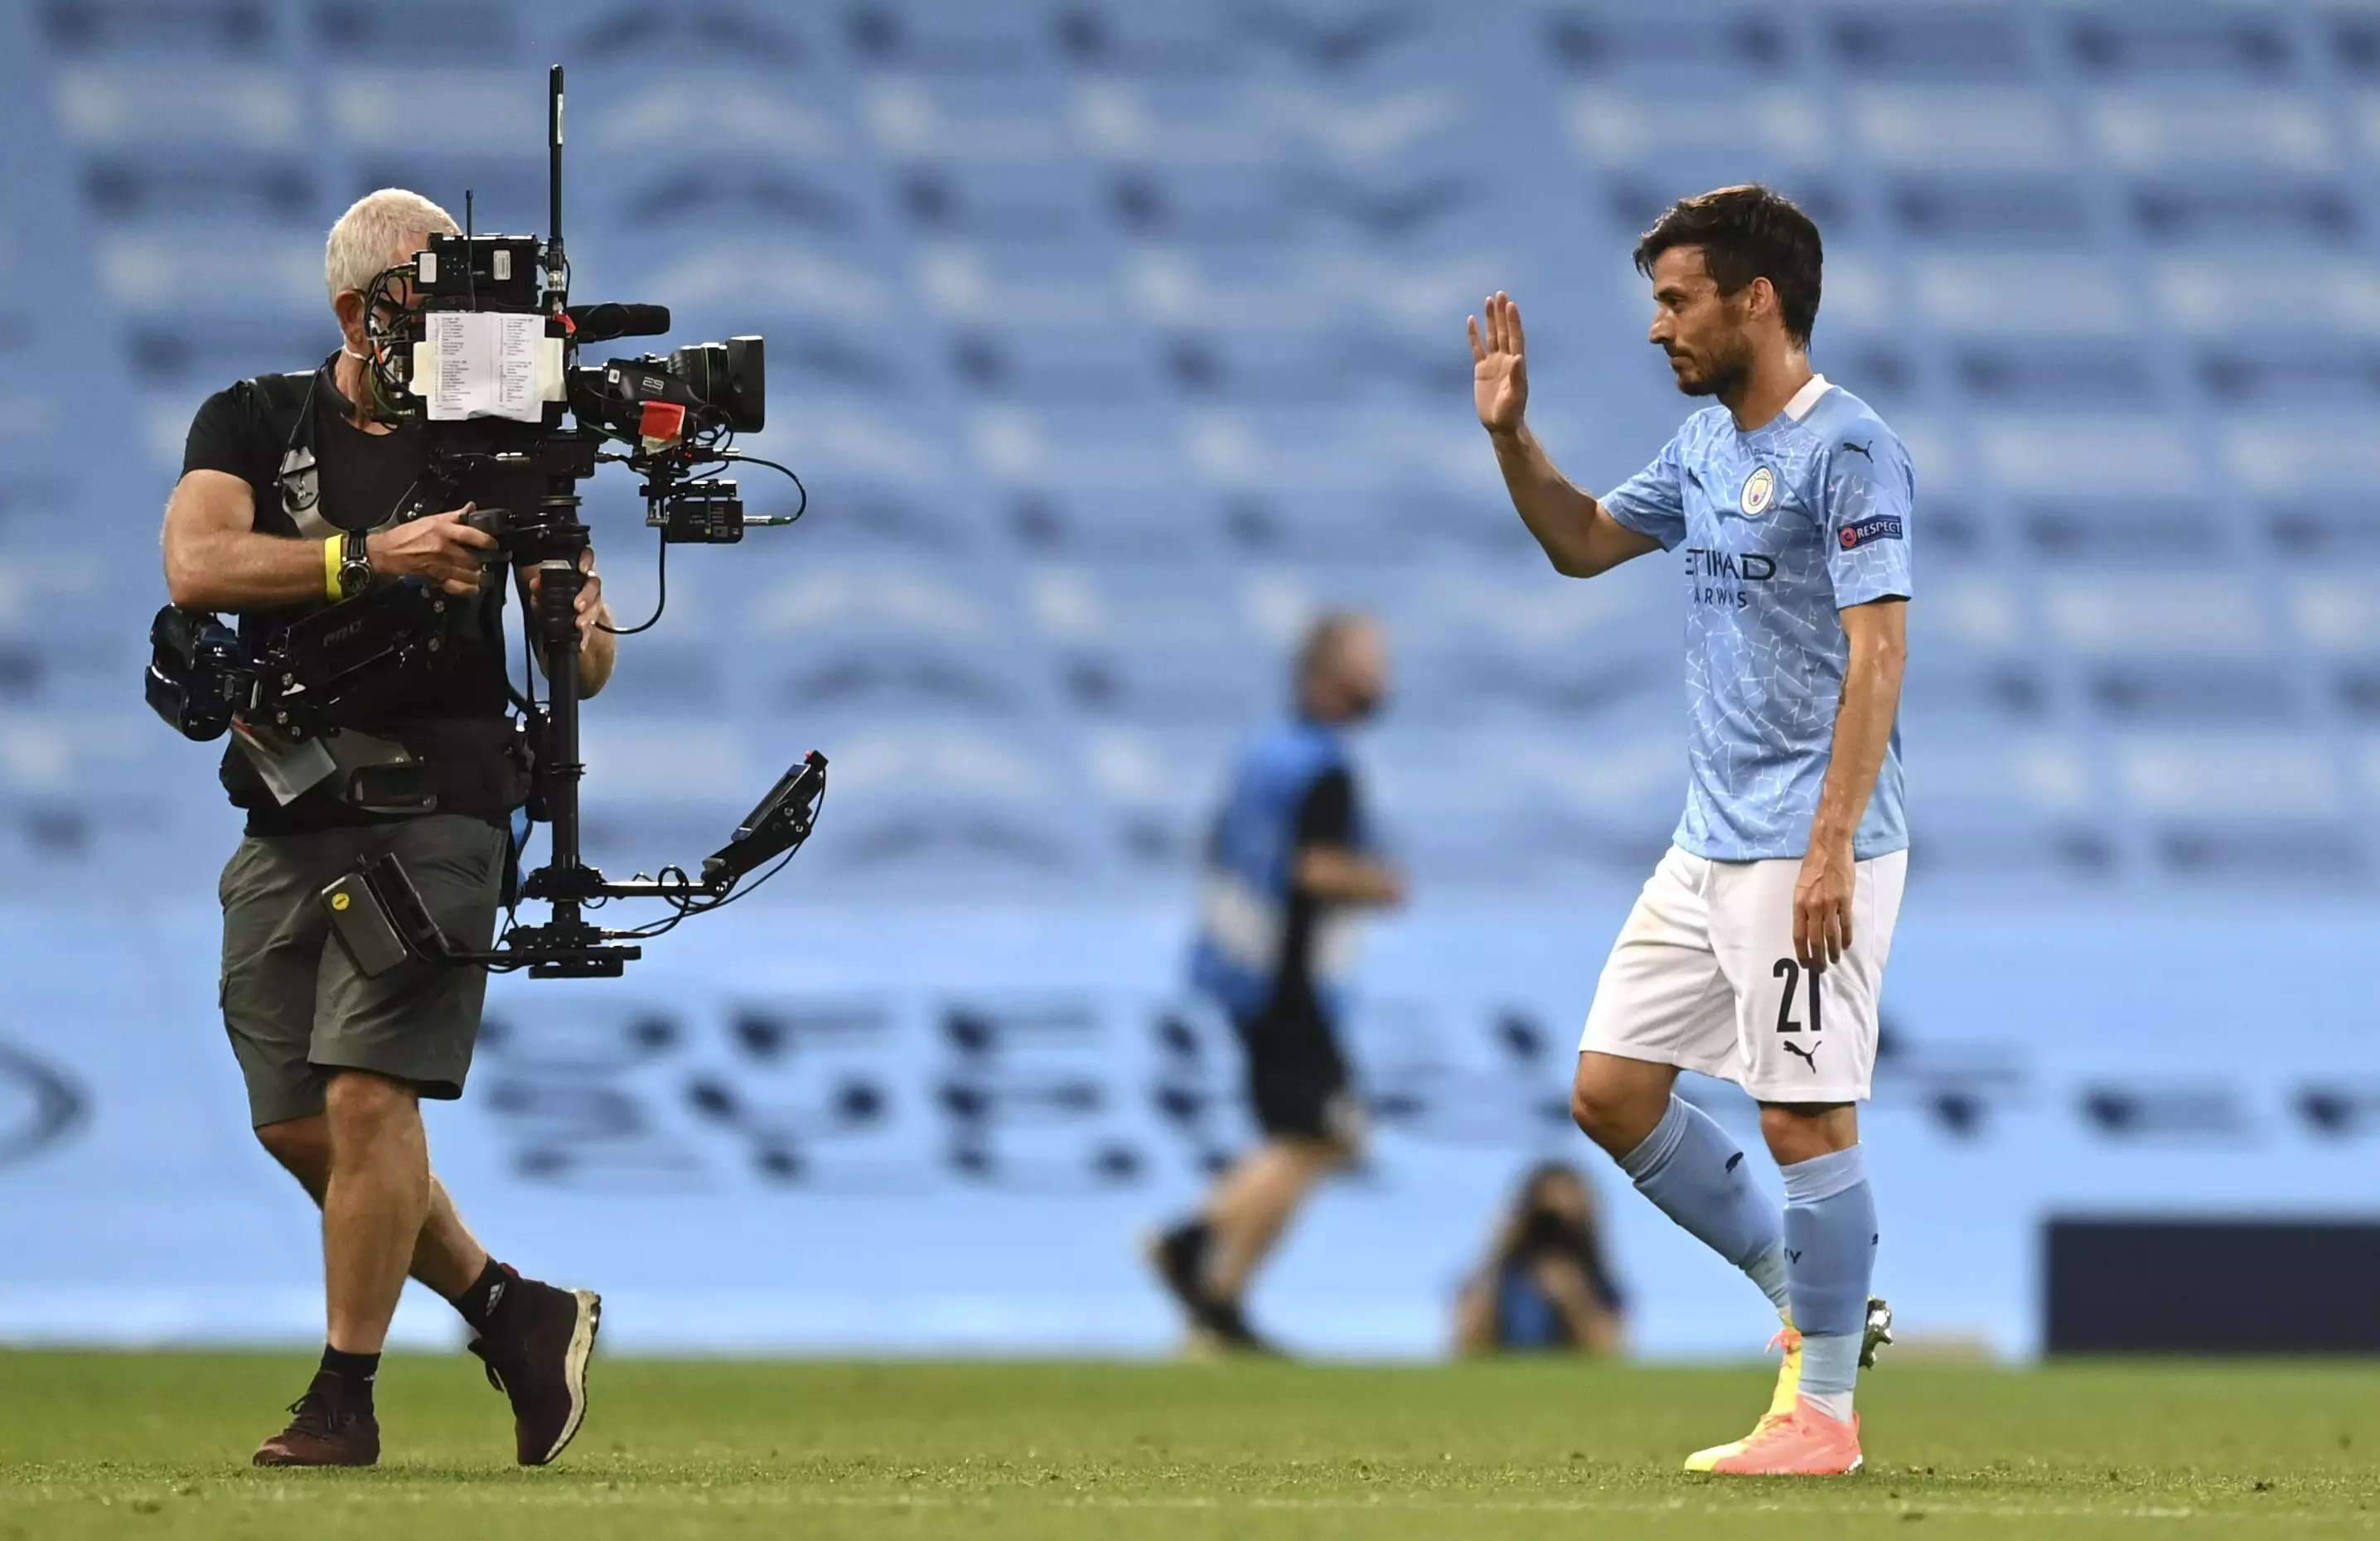 Silva waved goodbye to his City career after the Lyon game at the weekend. Image: PA Images